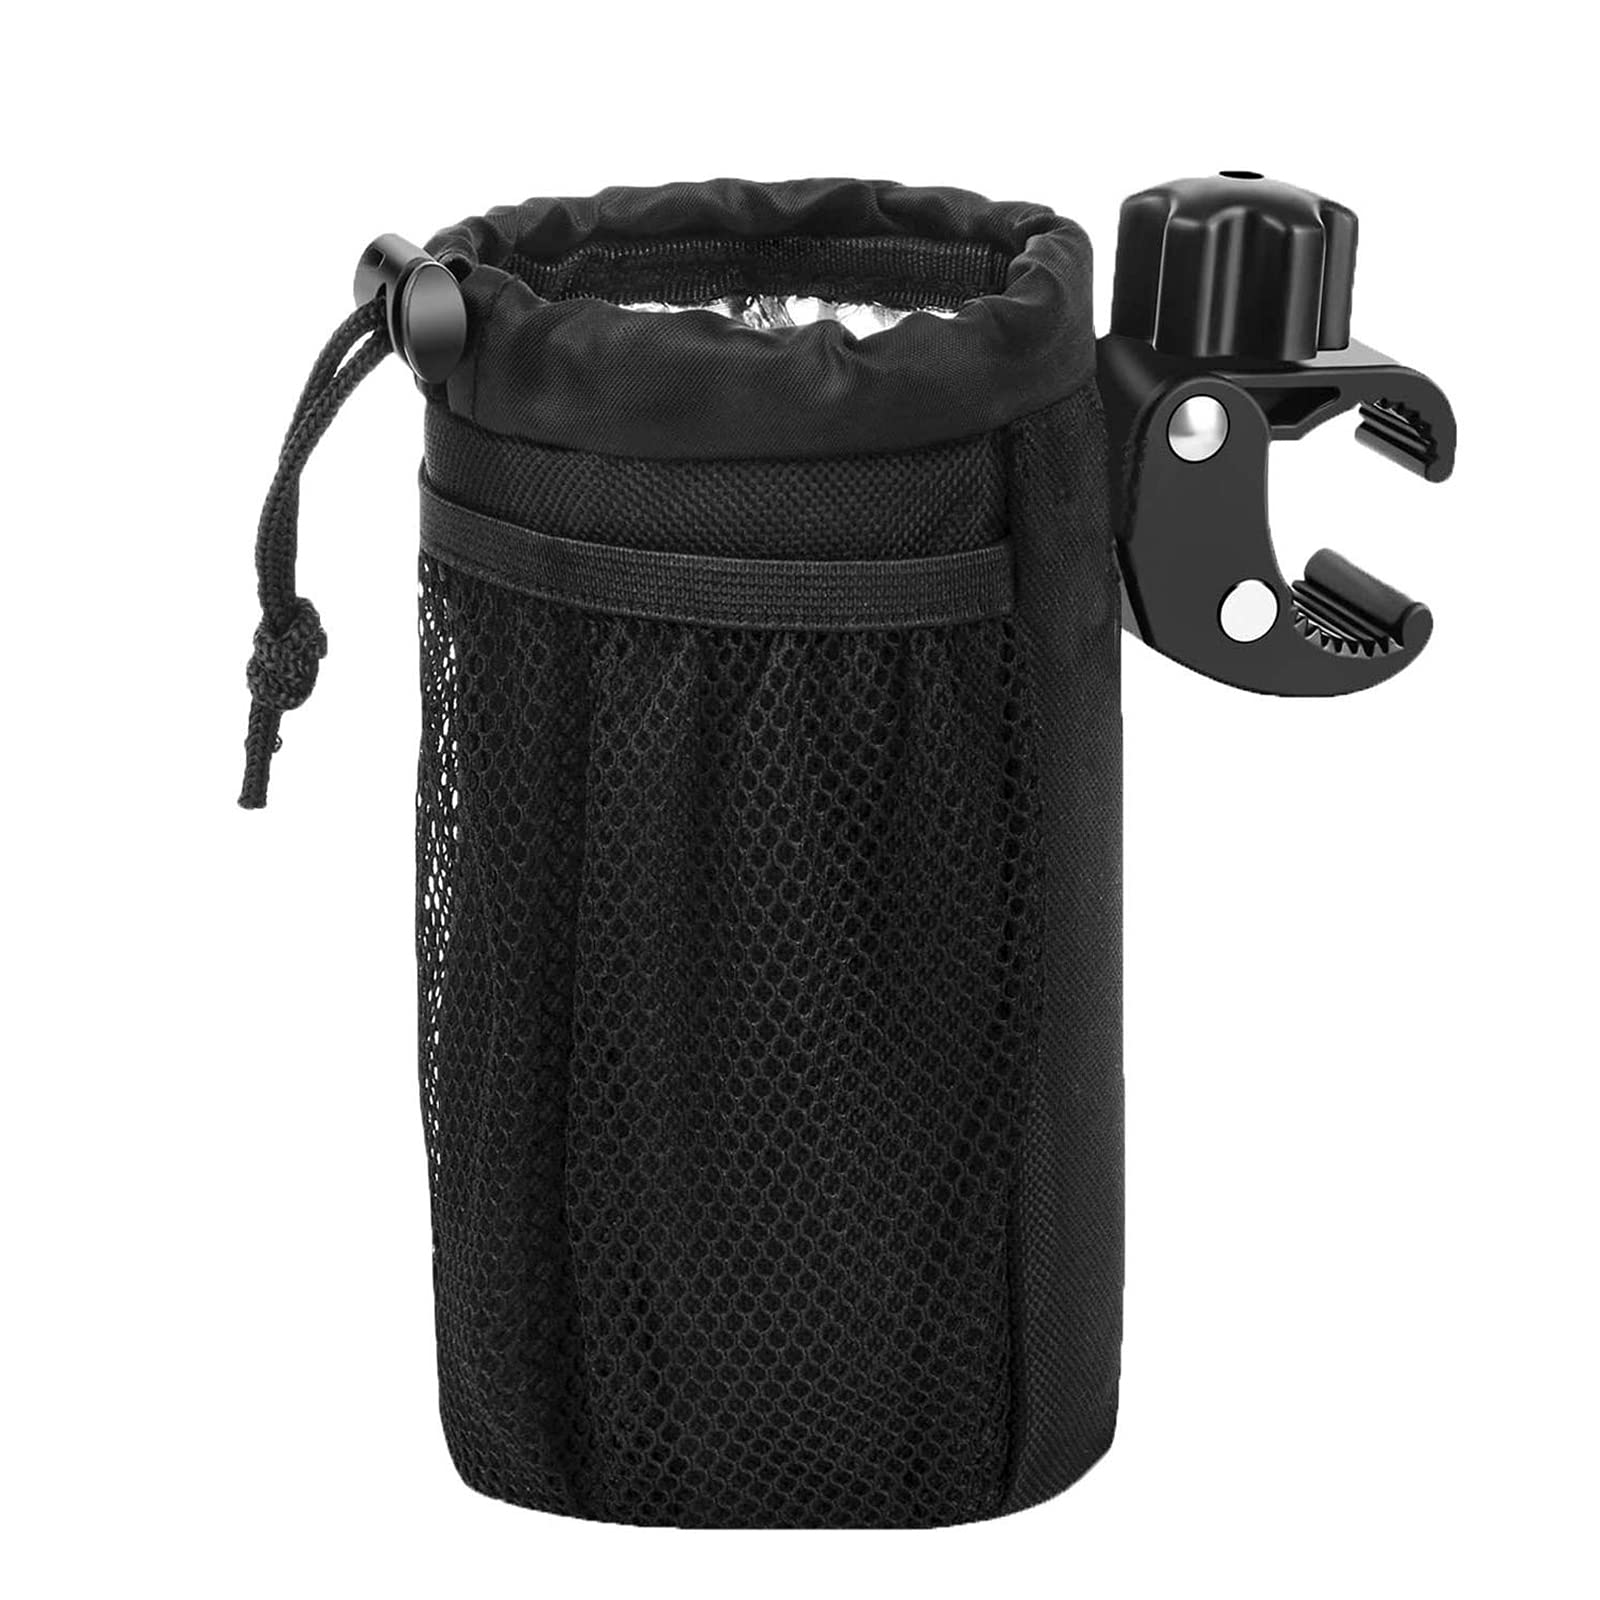 Yuehuamech Bike Handlebar Water Bottle Holder Bag Drink Cup Holder with Alligator Clip Phone Storage Pouch Handlebar Bag Beverage Container for All Motorcycle Scooter von Yuehuamech